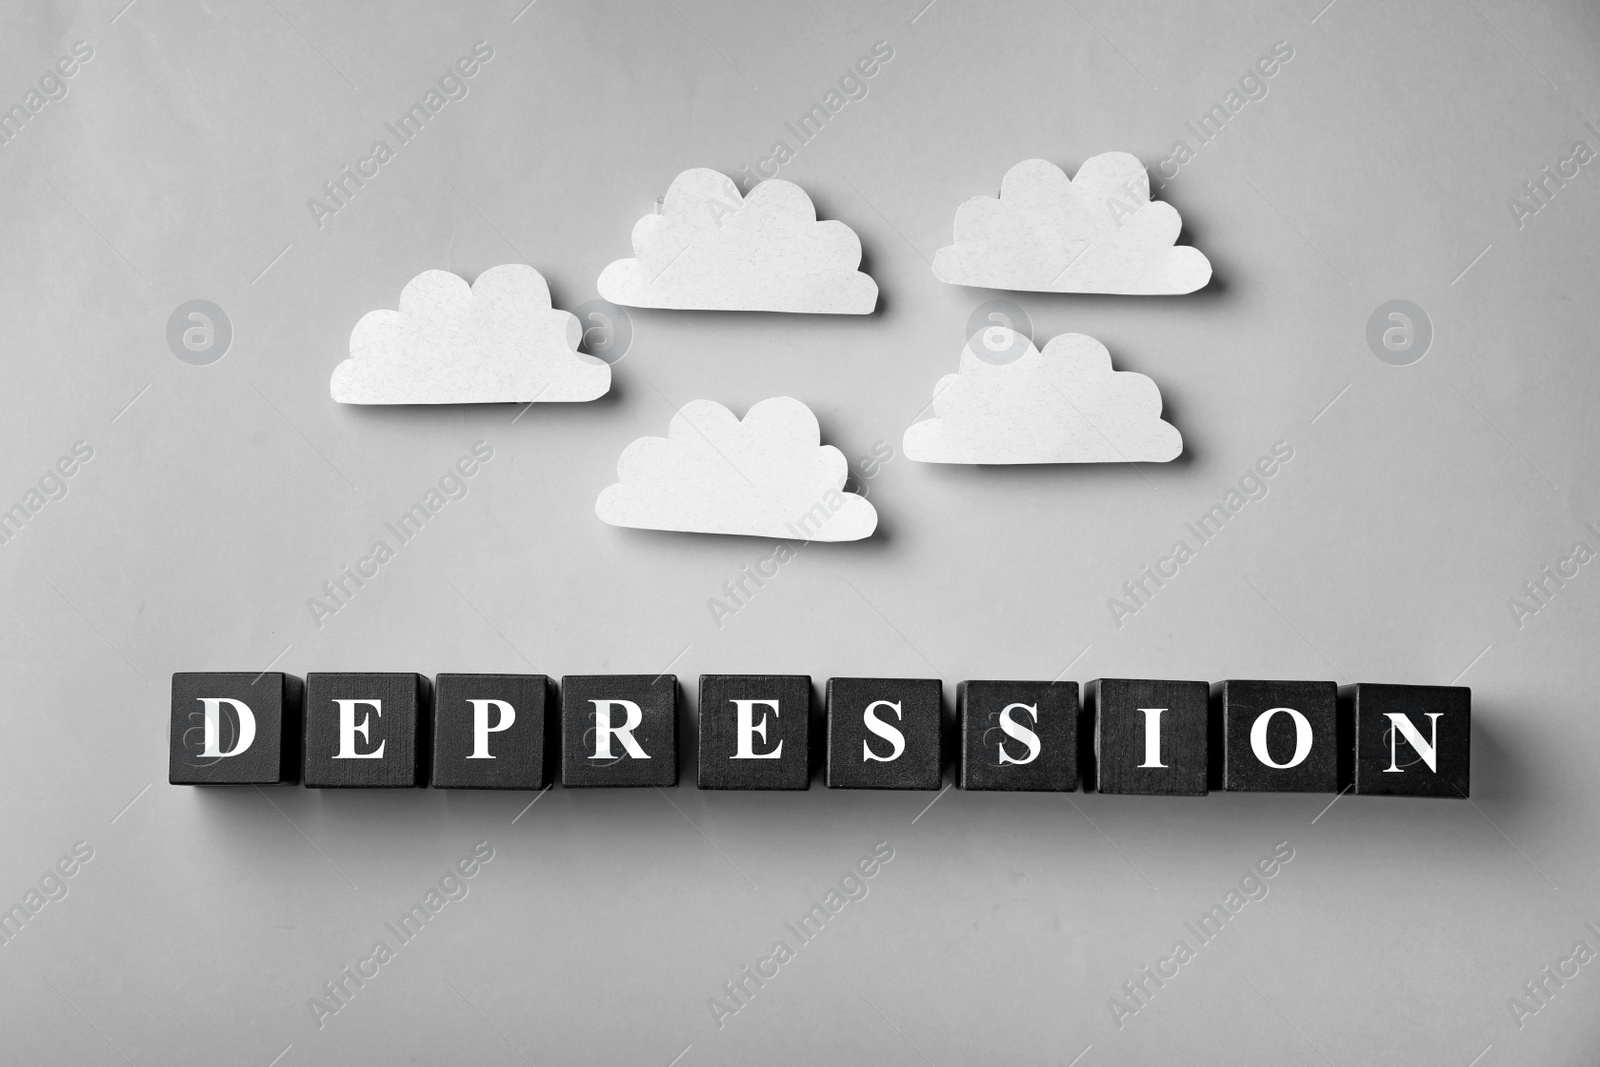 Photo of Word Depression made of black wooden cubes and decorative clouds on light background, top view